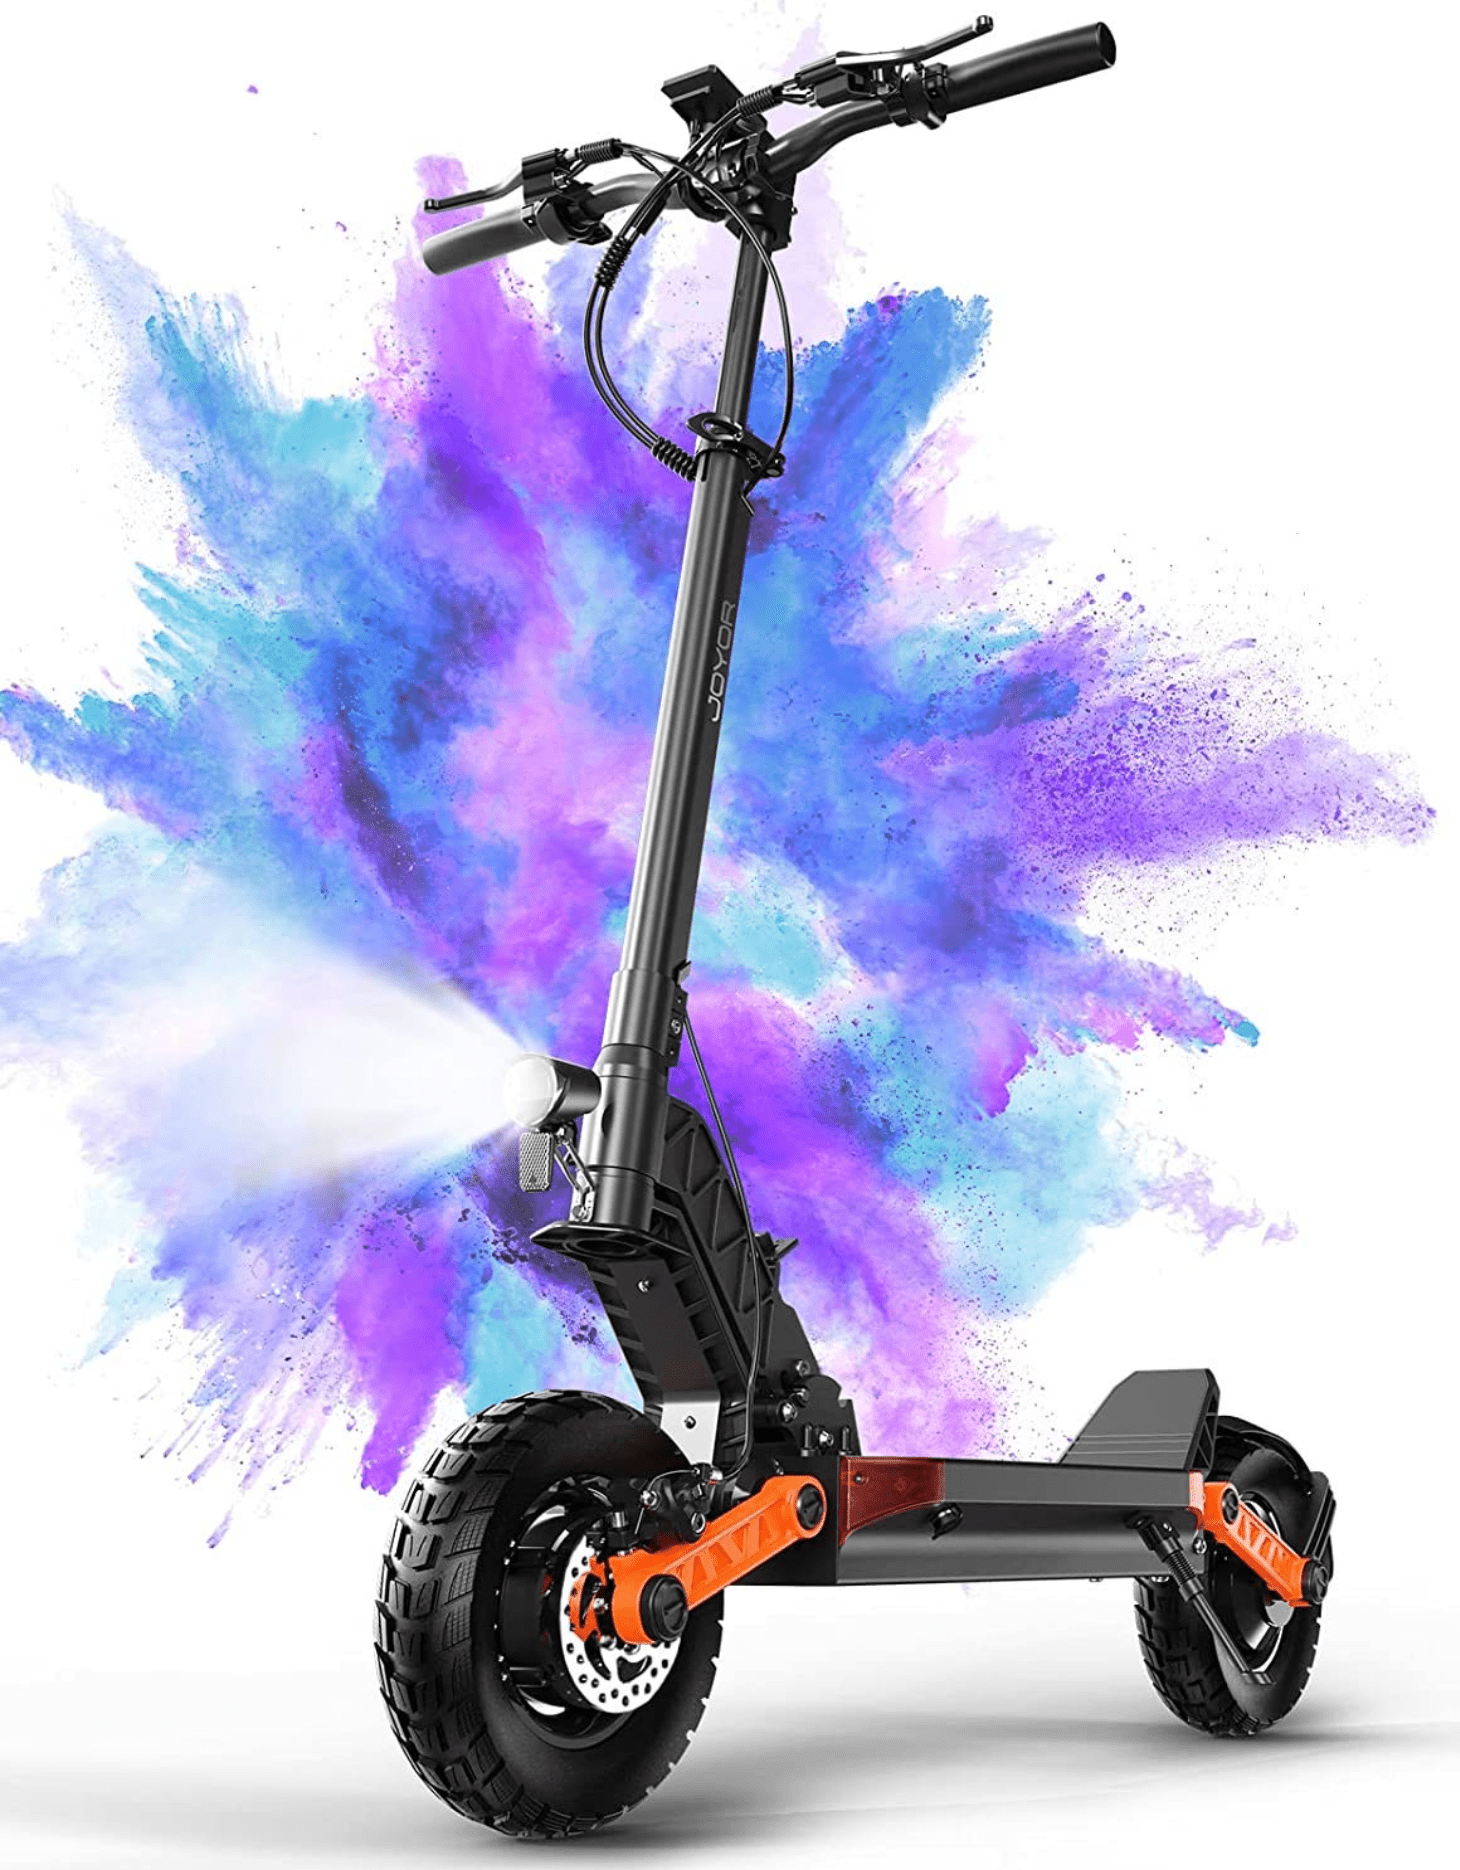 Heavy Rider Owner Review - Joyor S5 Electric Scooter 